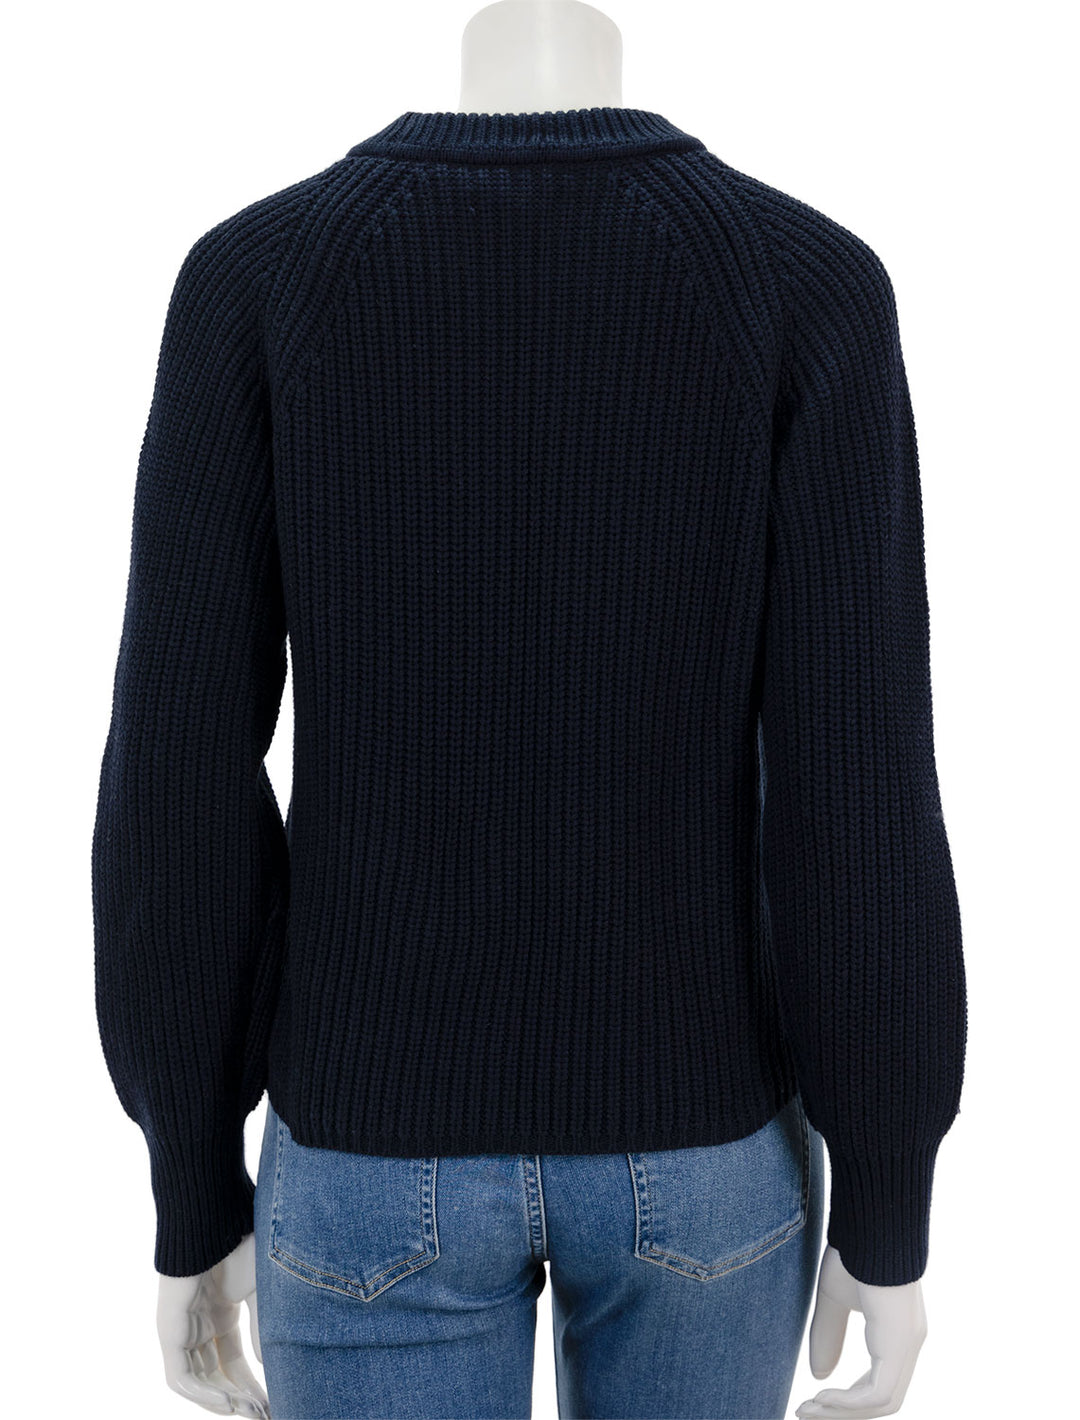 Back view of Alex Mill's Amalie Pullover Sweater in Navy.